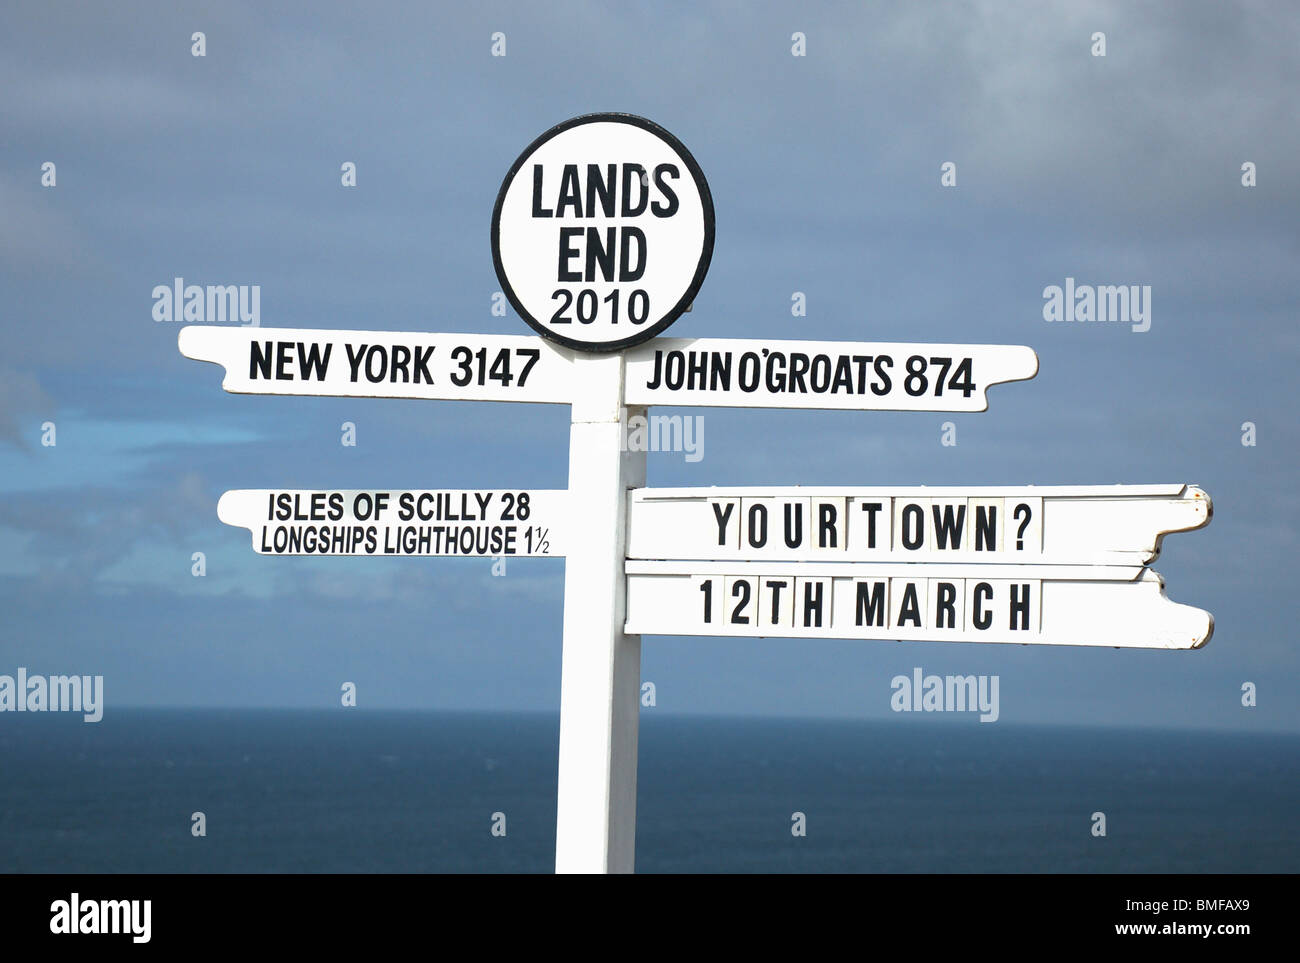 Lands End sign post Stock Photo